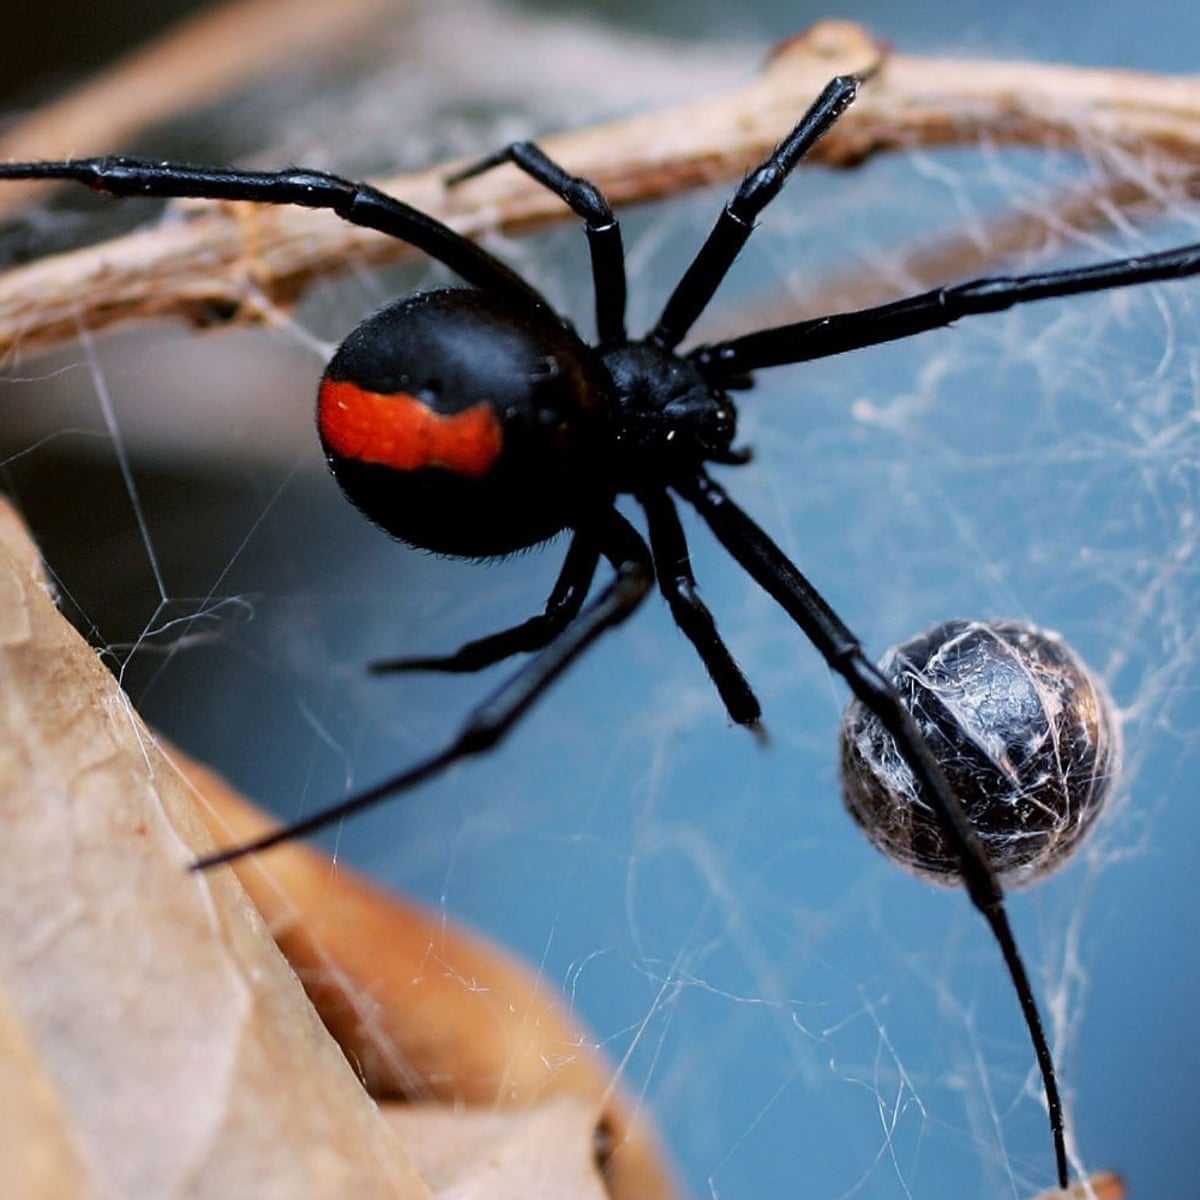 buik En Bergbeklimmer Male redback spiders evade cannibalism by mating with immature females |  Spiders | The Guardian